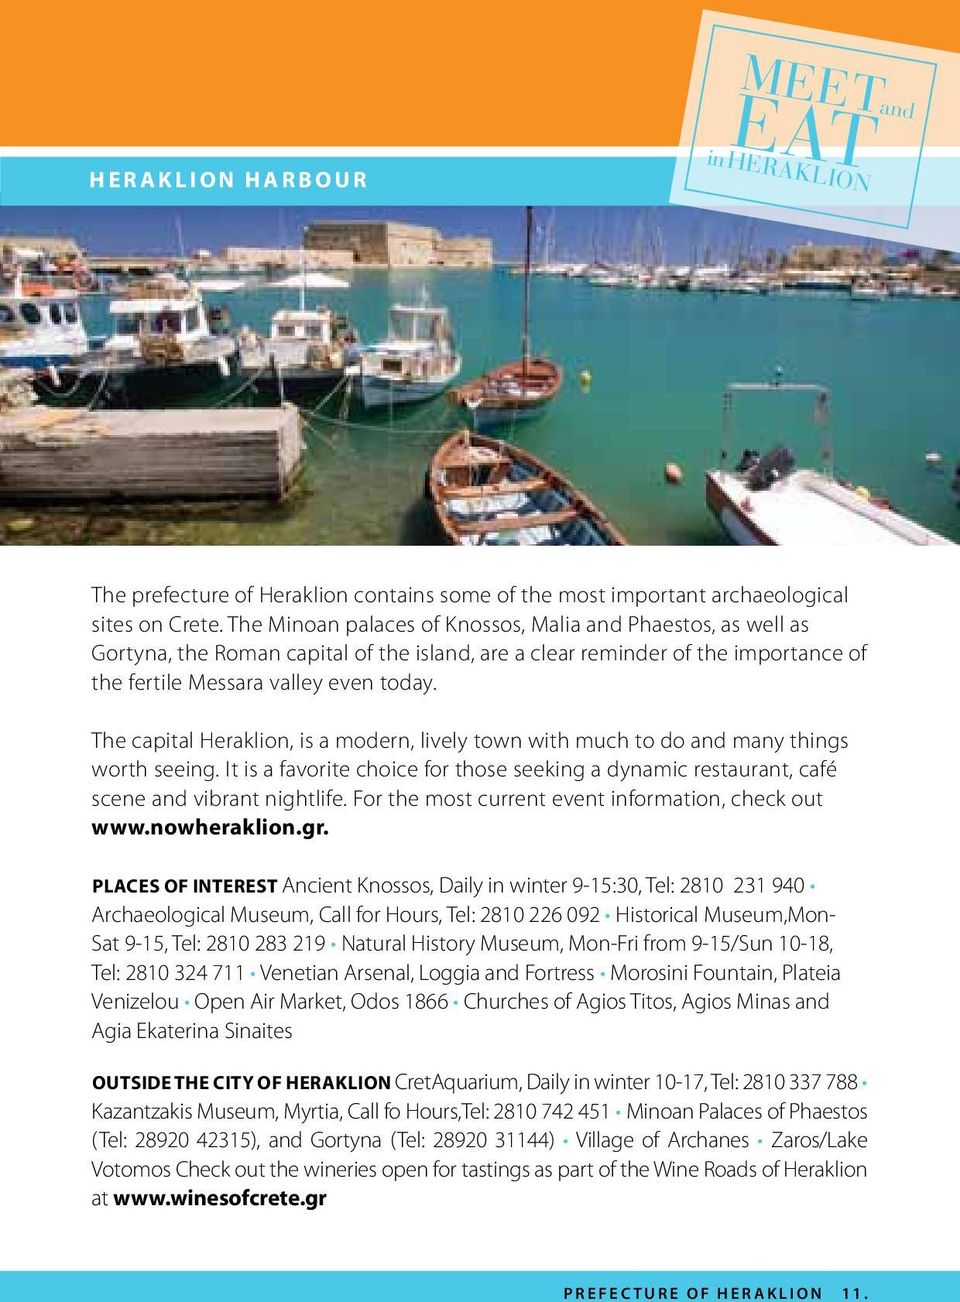 The capital Heraklion, is a modern, lively town with much to do and many things worth seeing. It is a favorite choice for those seeking a dynamic restaurant, café scene and vibrant nightlife.